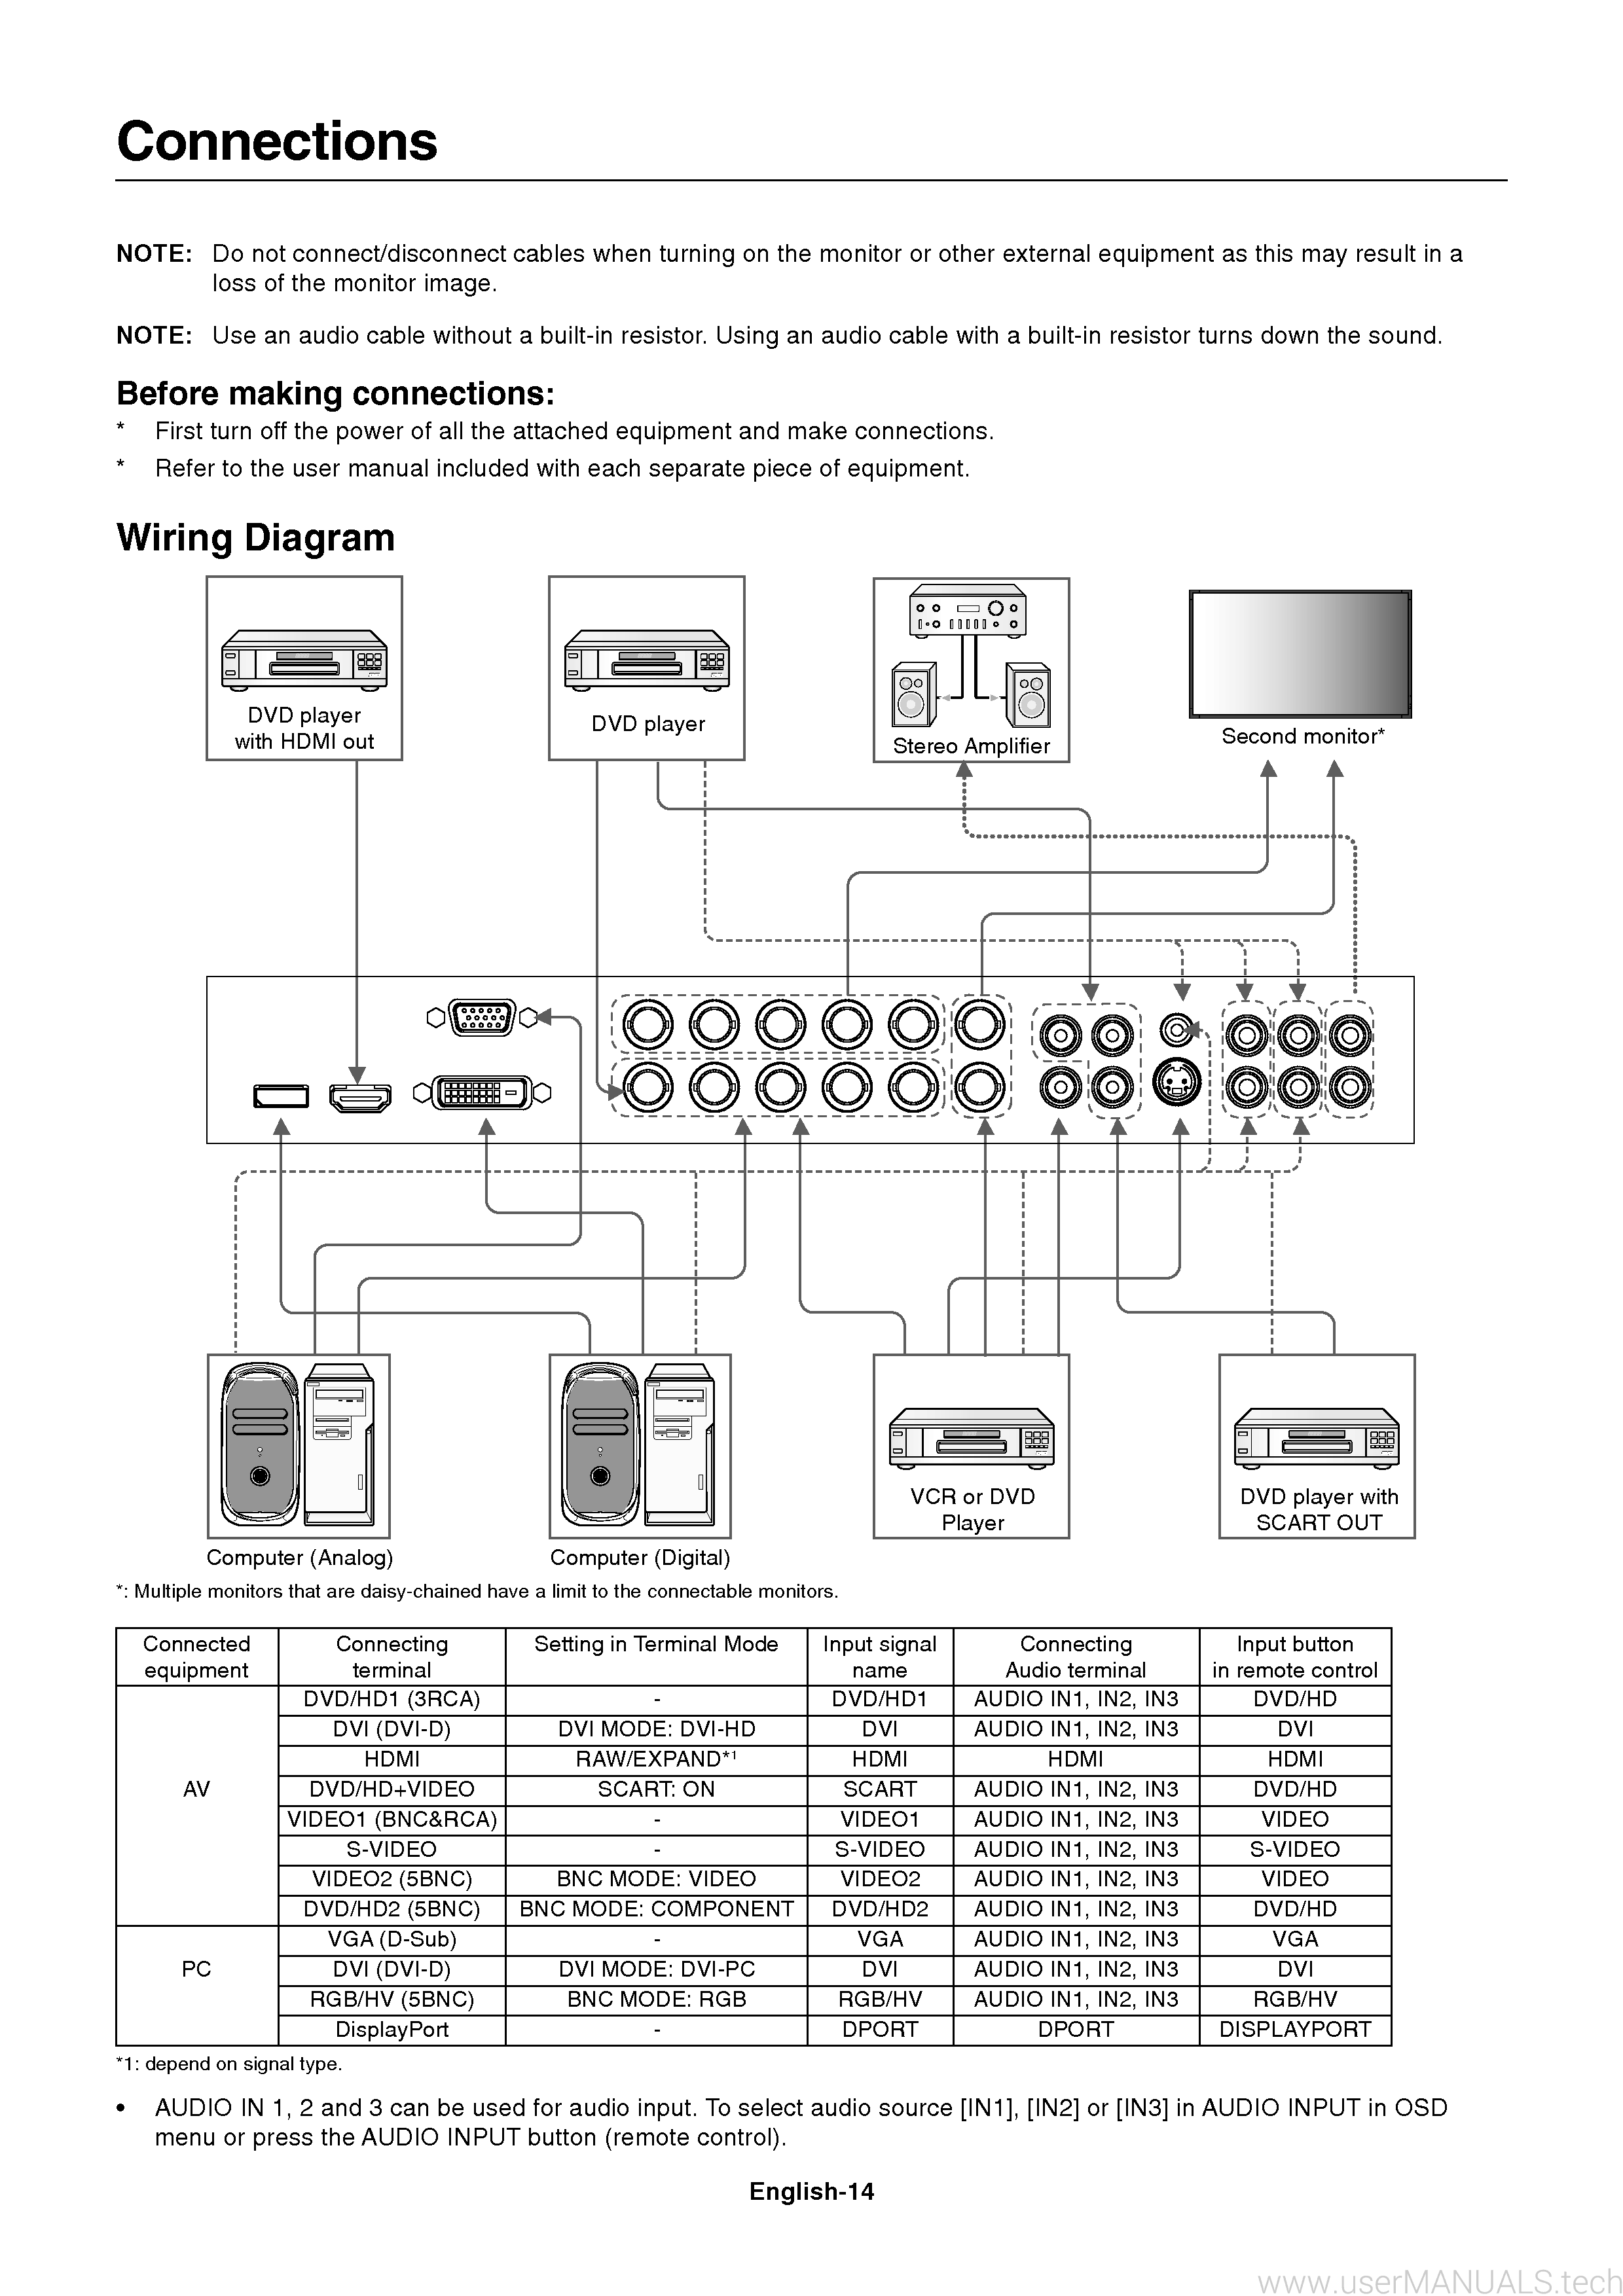 NEC Multisync P401 Users Manual, Page: 2